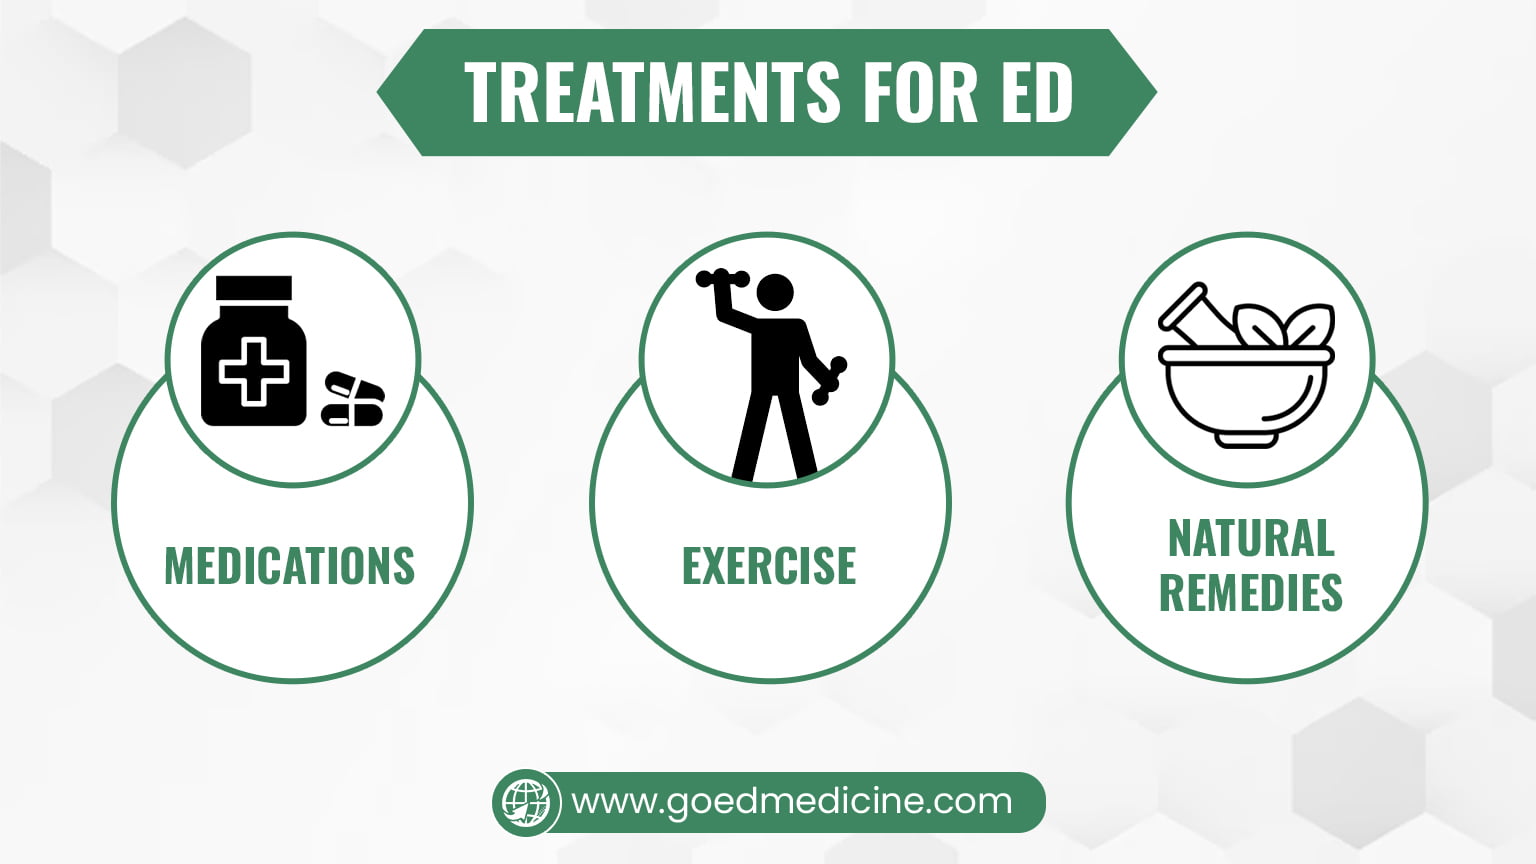 Treatments for ED